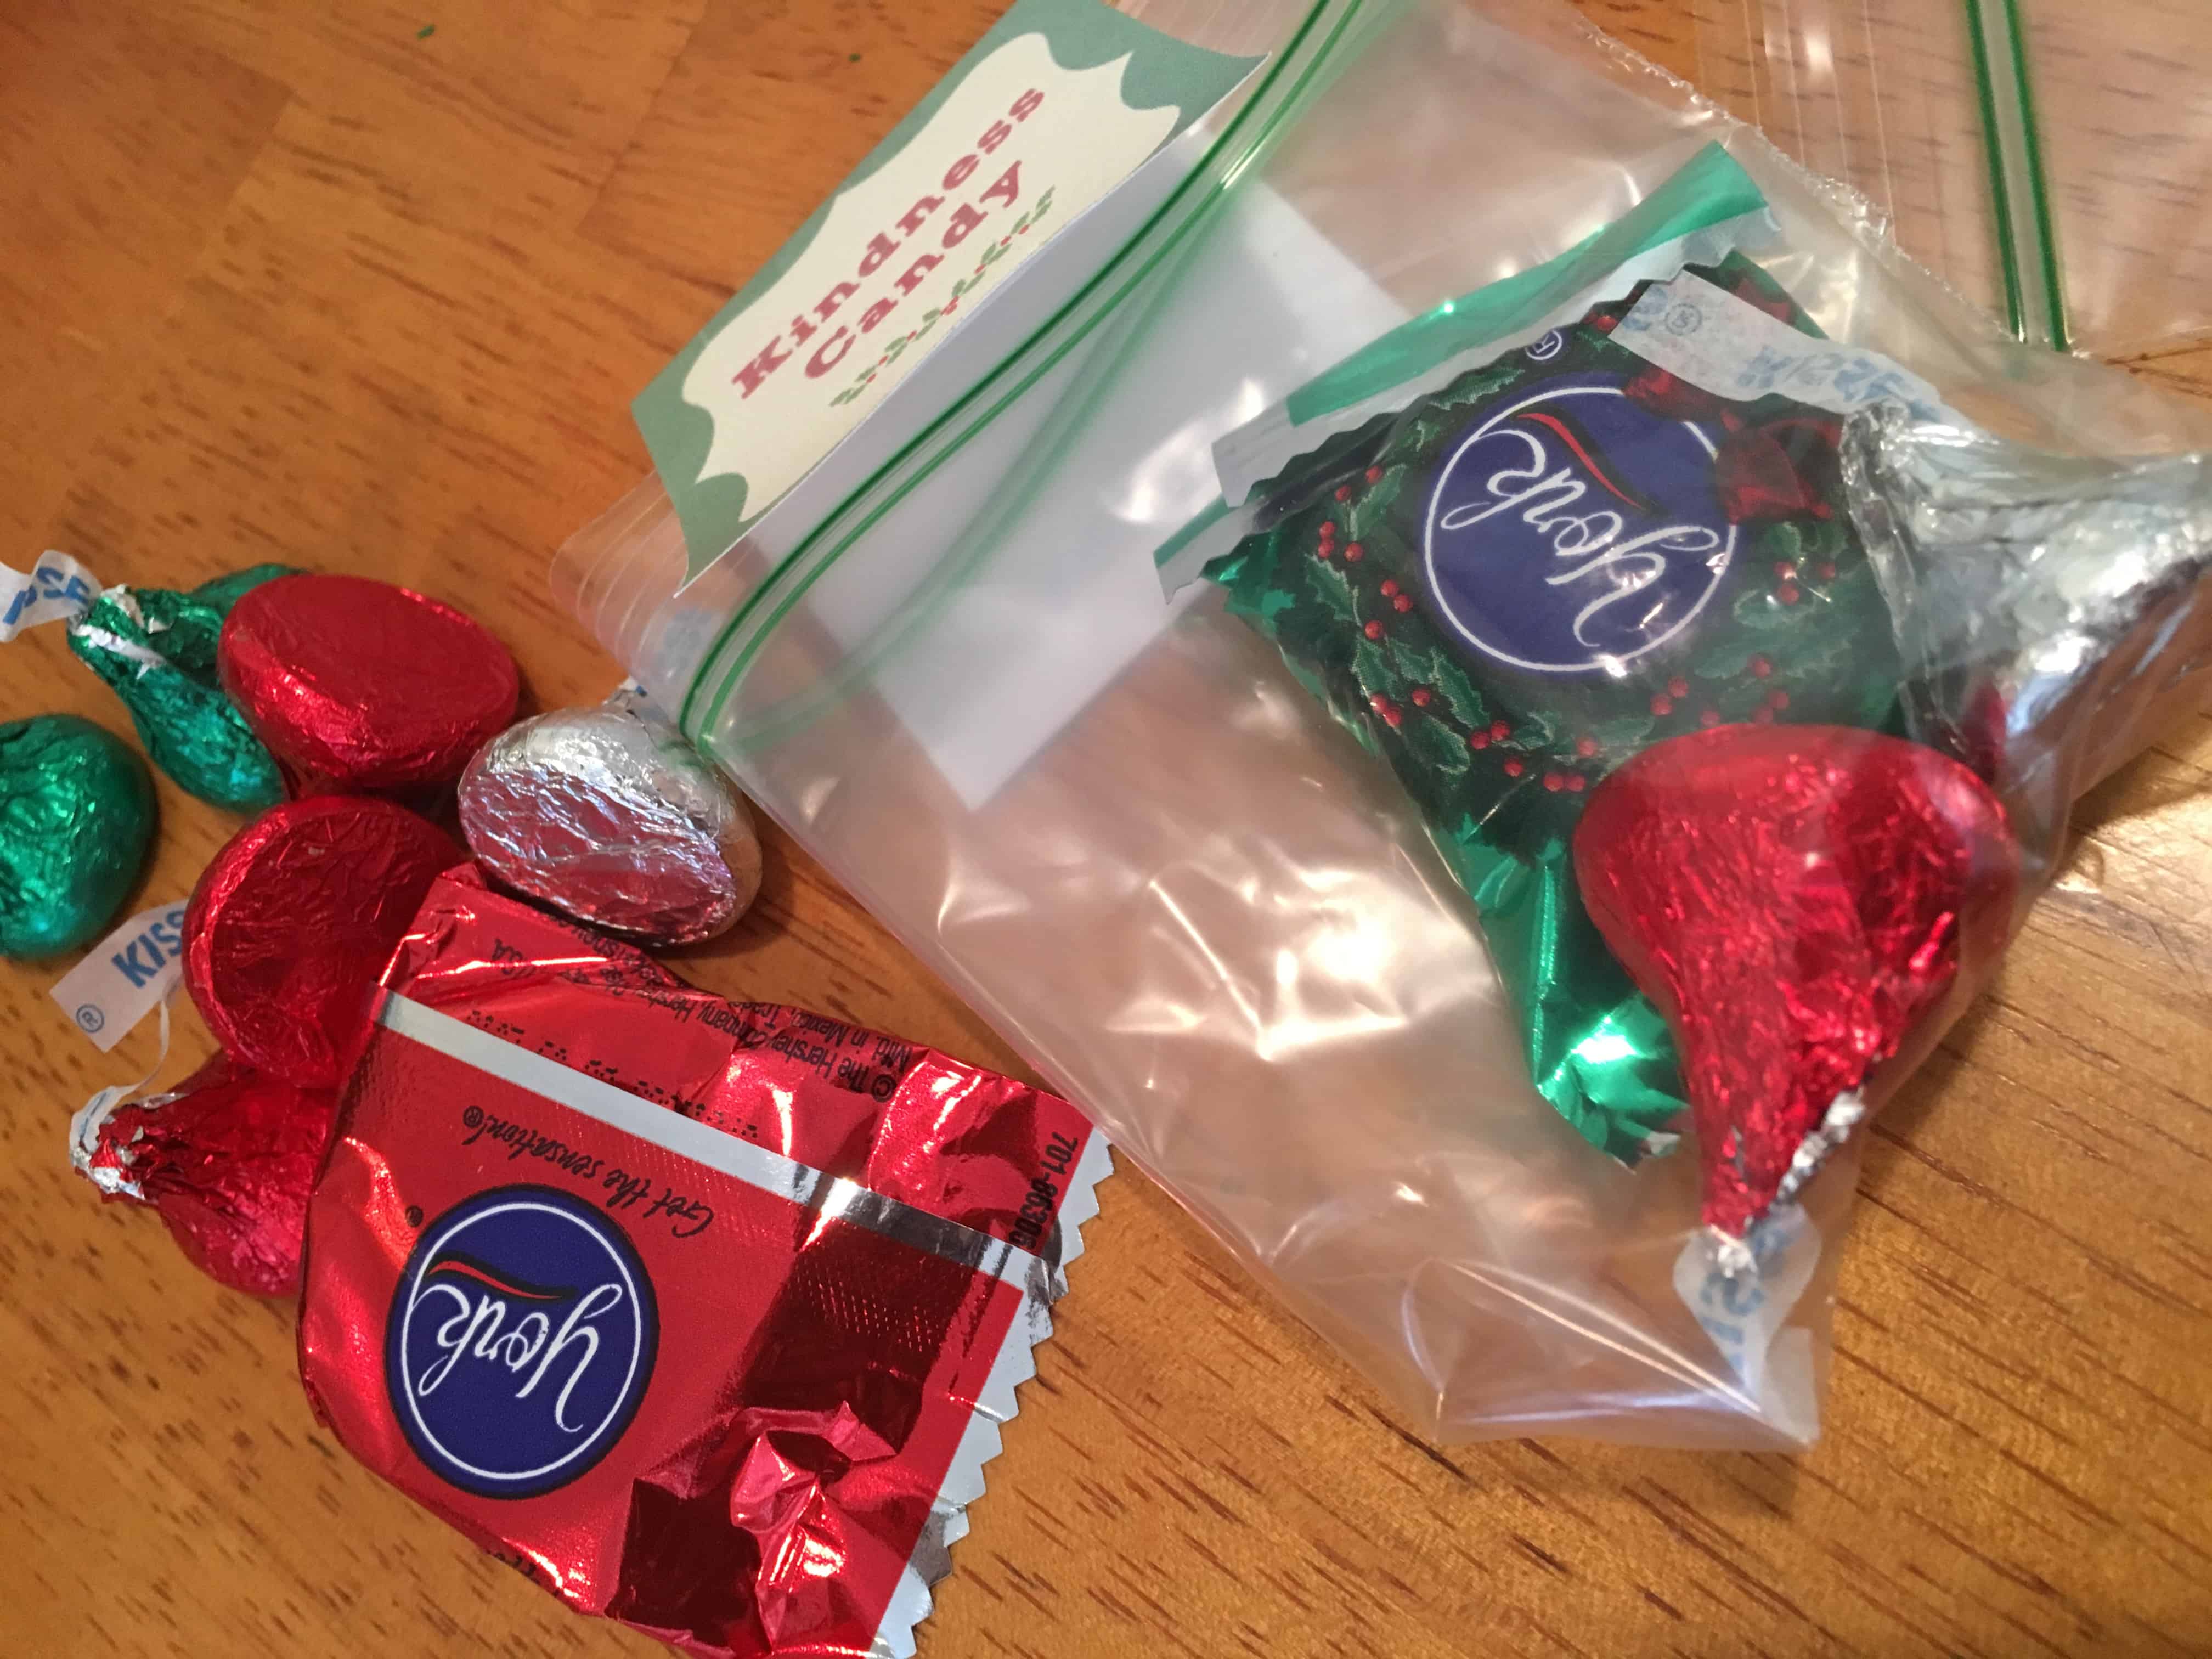 Create some kindness candy bags with this free printable and spread a little holiday cheer! Teach kindness.